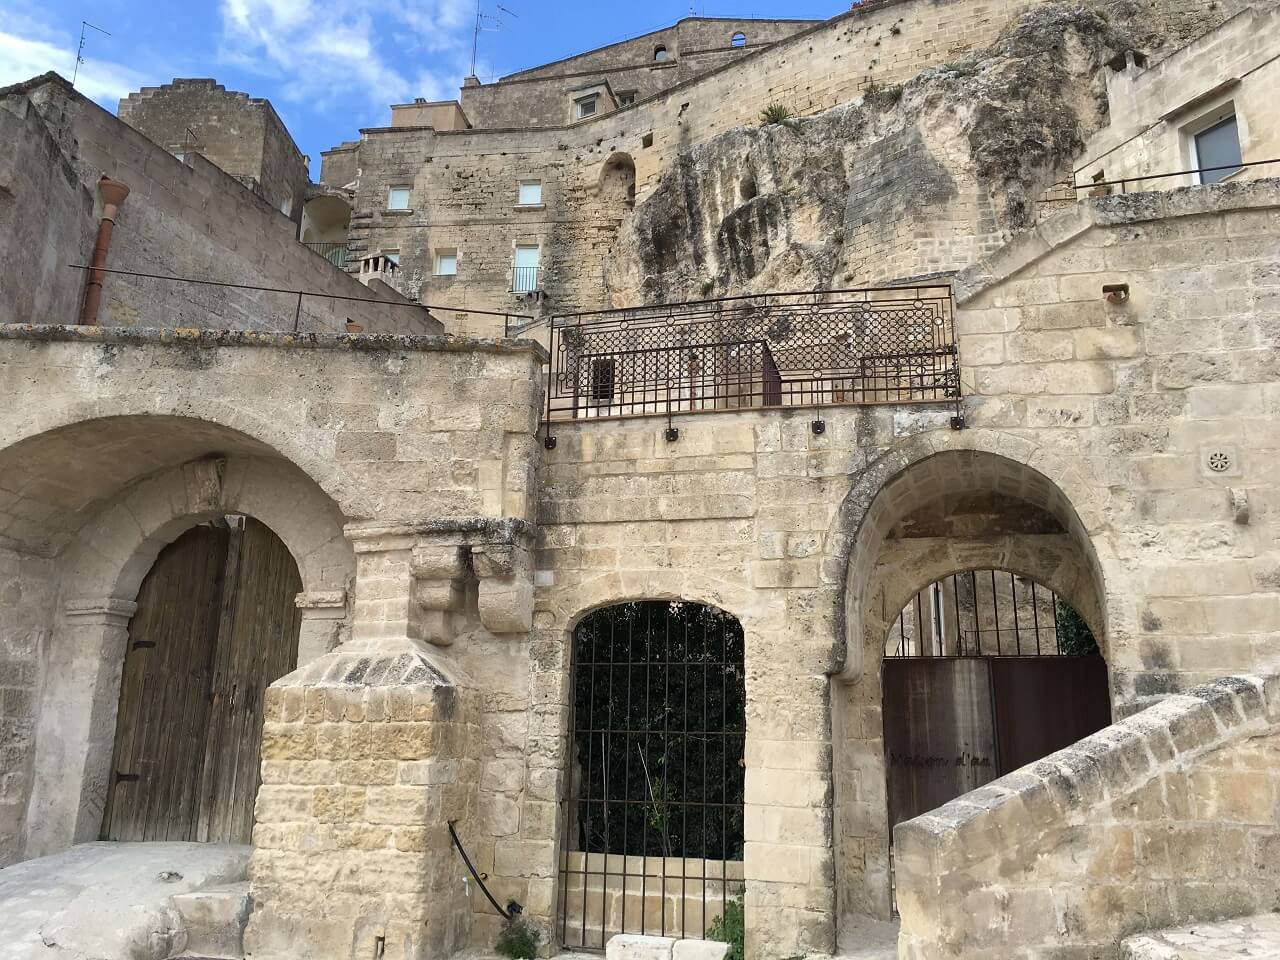 Matera is so unique it is a location for period films.